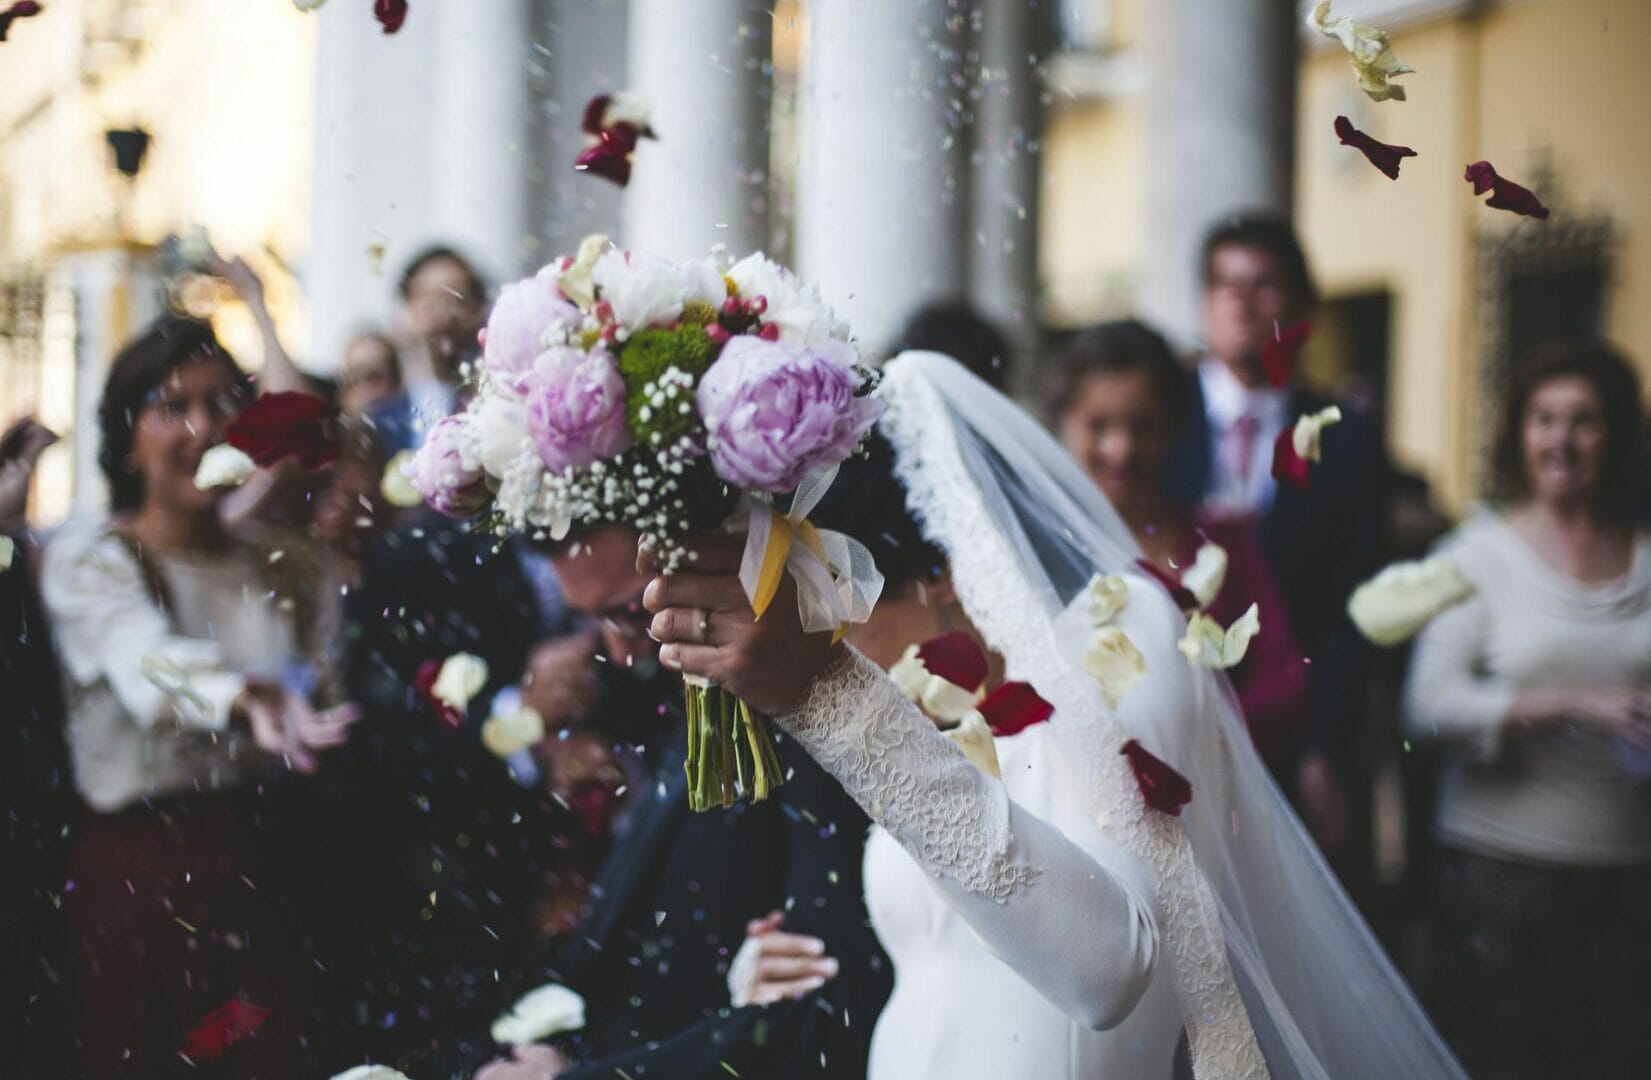 Forget the Best Man – Here’s How To Write a Bride’s Speech That Will Leave The Crowd